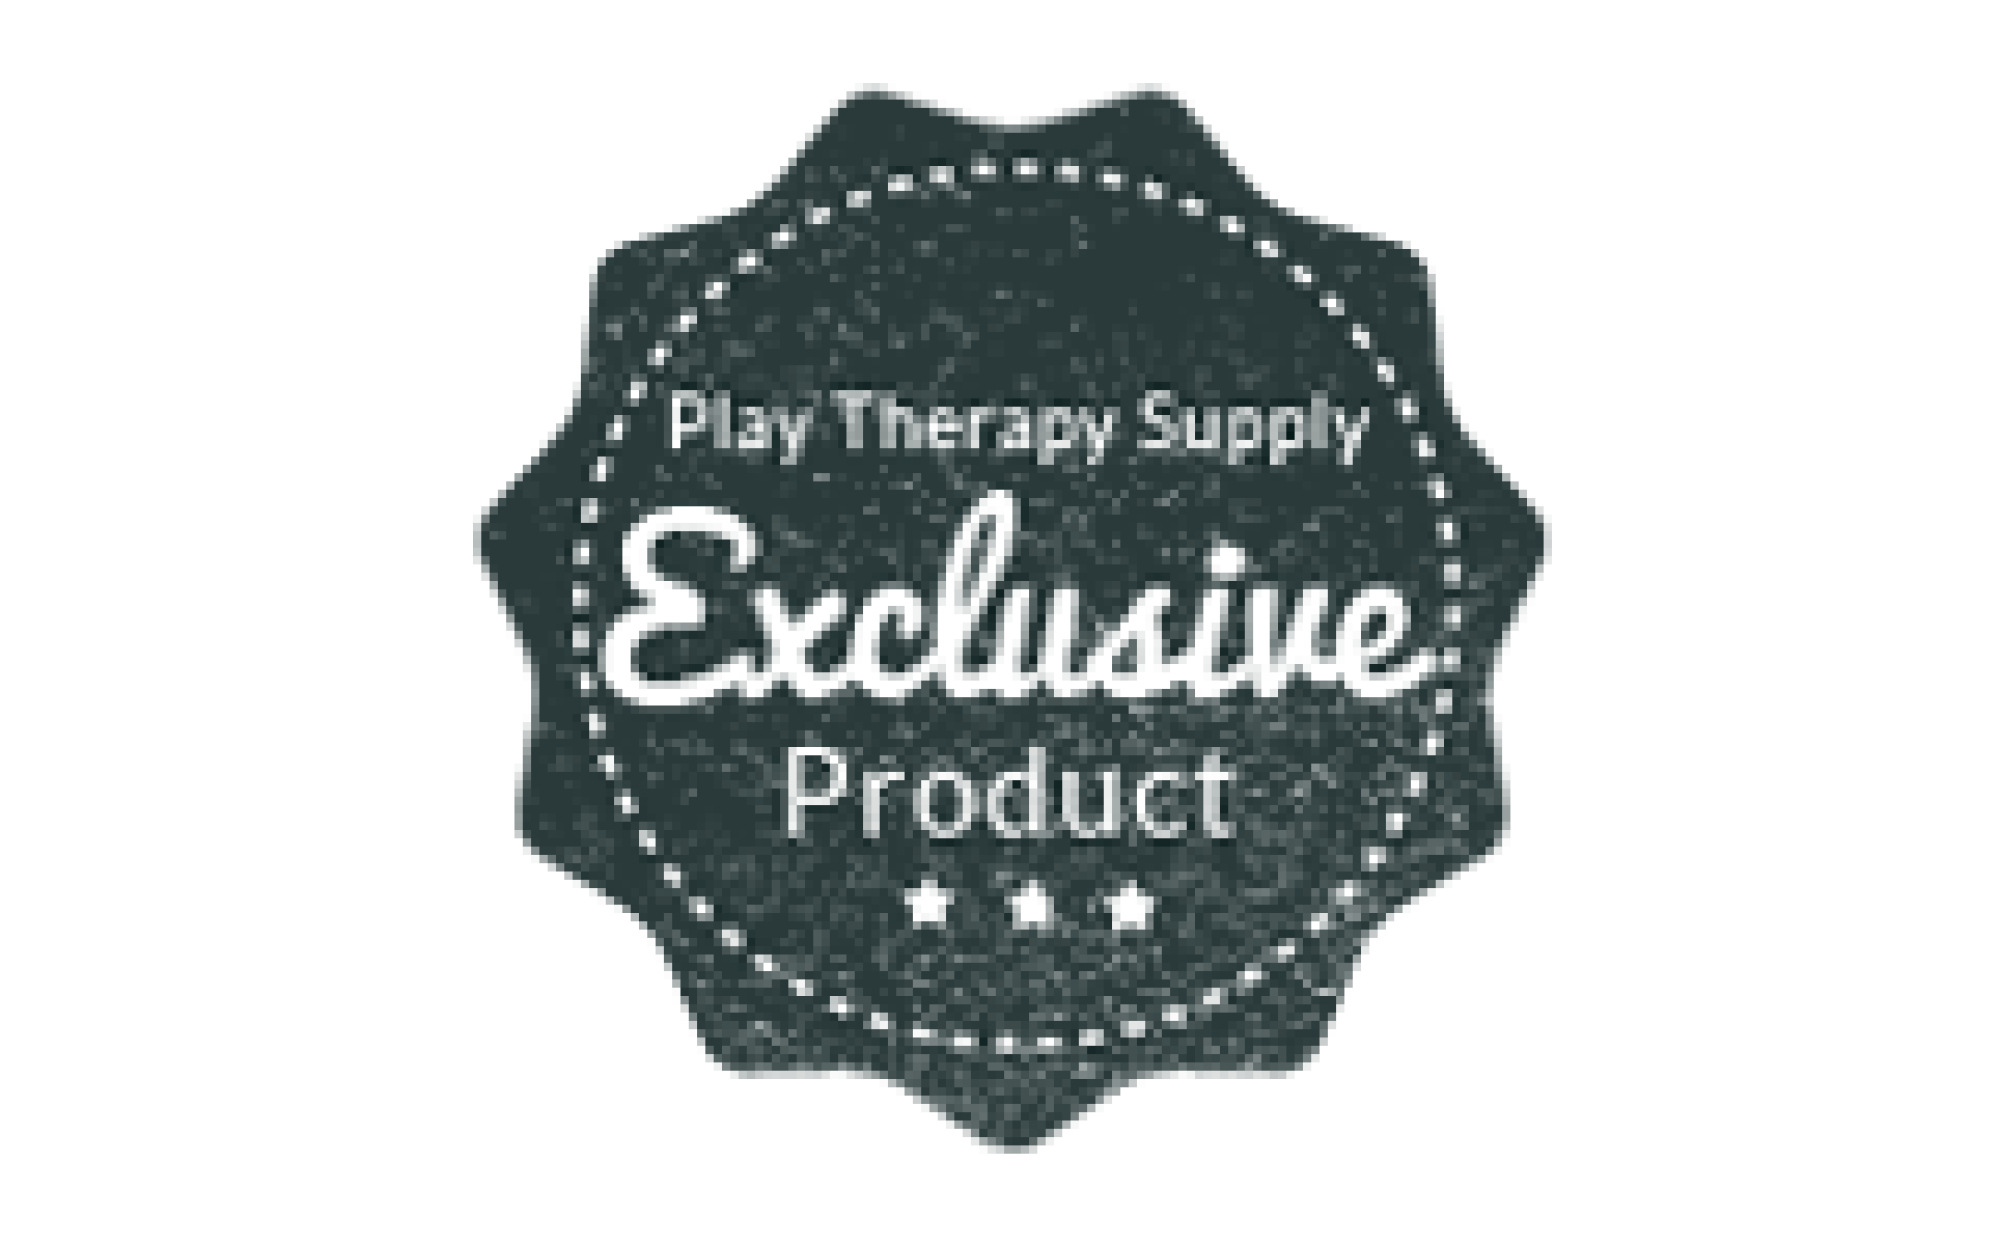 Welcome to Sand Trays Etc.  Sand Play Therapy Supplies